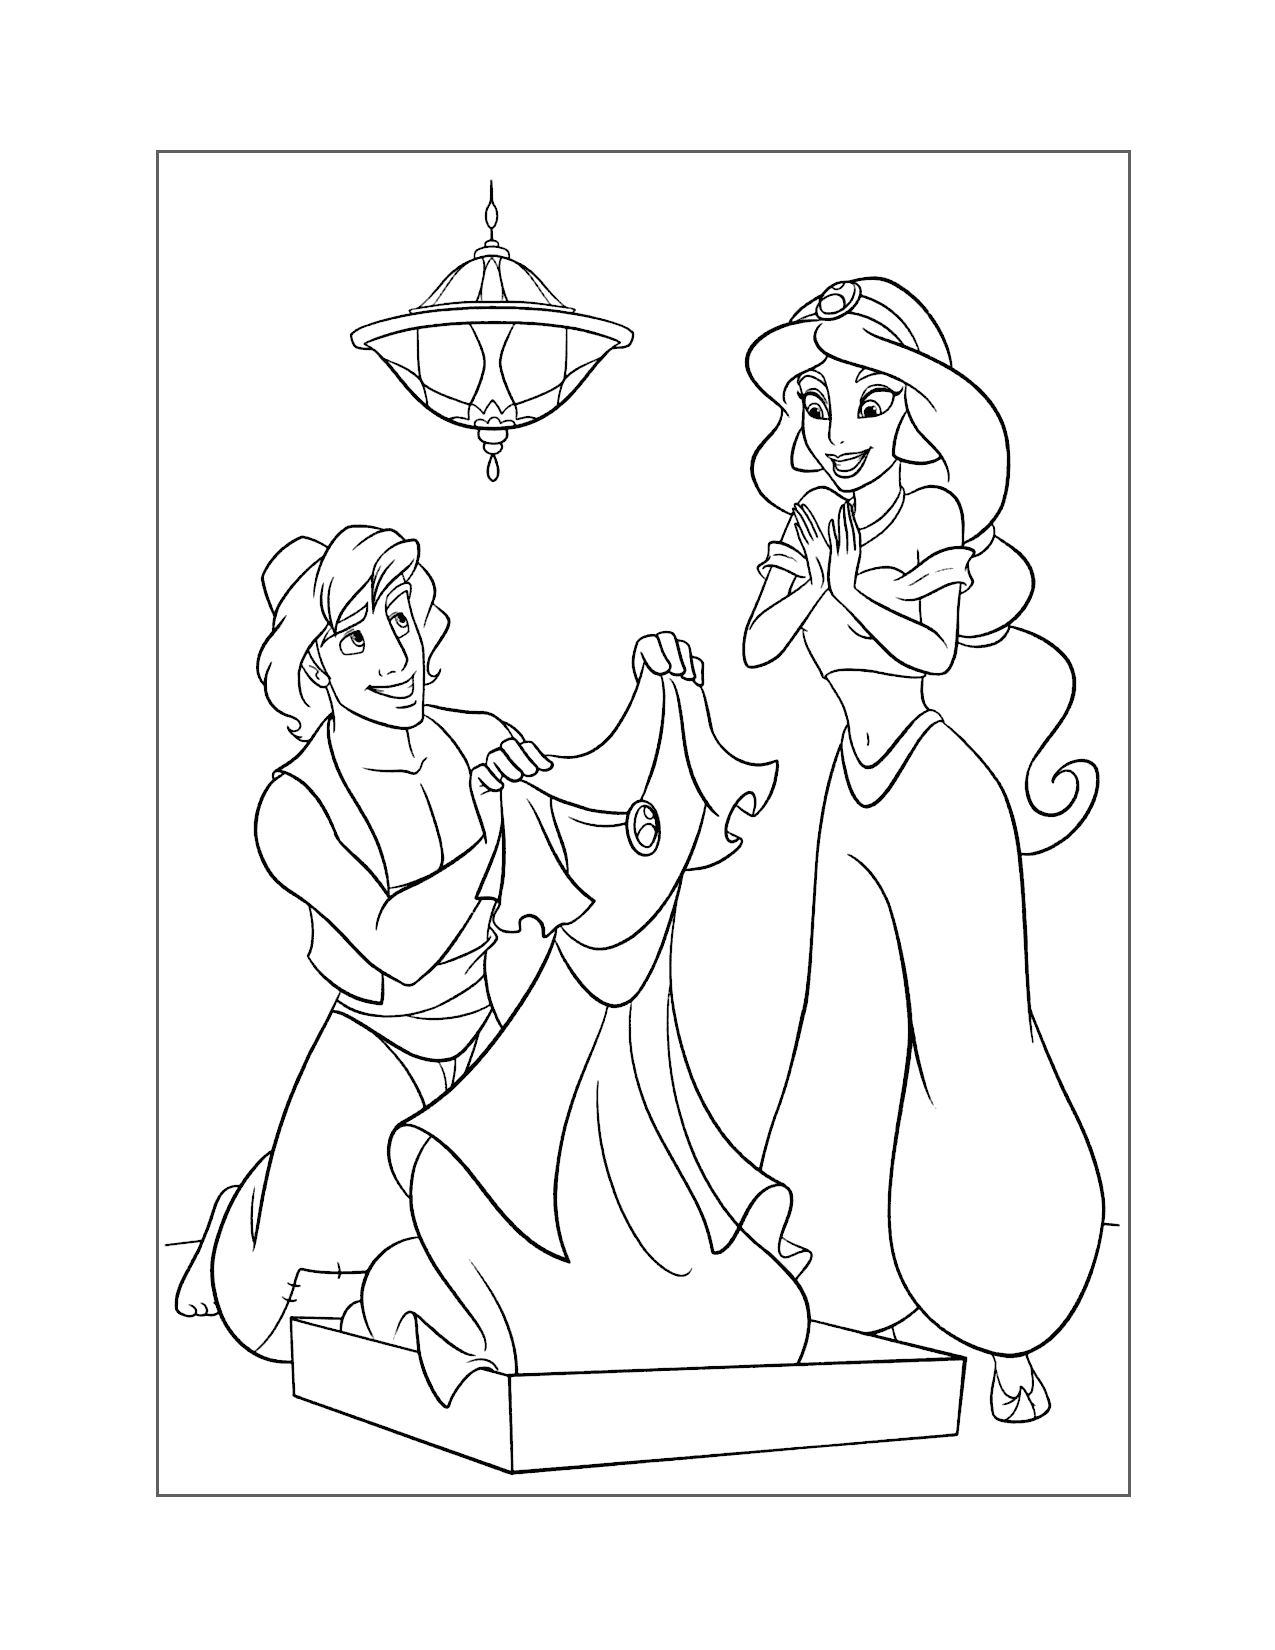 Aladdin Gives Jasmine A Gift Coloring Page